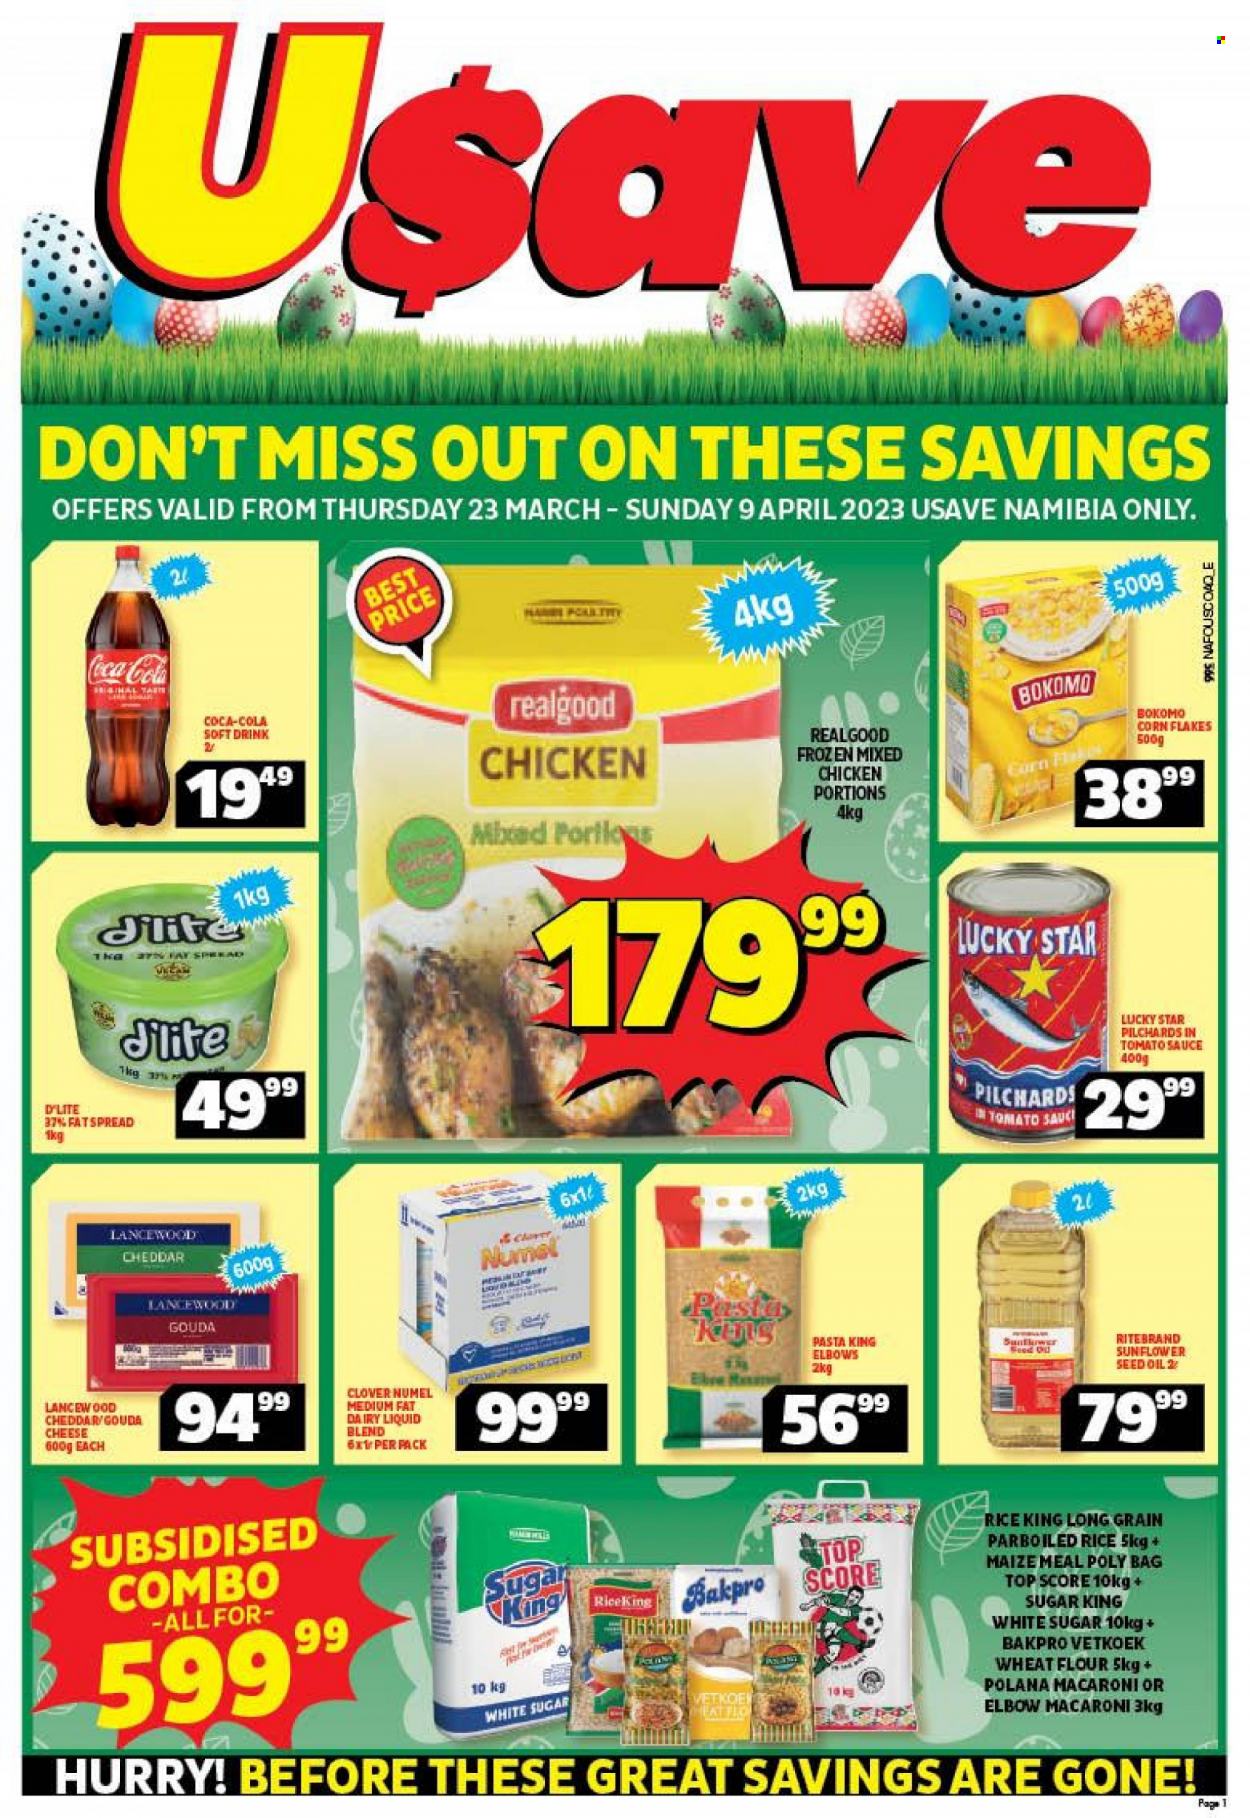 thumbnail - Shoprite catalogue  - 23/03/2023 - 09/04/2023 - Sales products - sardines, macaroni, pasta, gouda, cheddar, cheese, Lancewood, fat spread, flour, sugar, wheat flour, maize meal, corn flakes, rice, parboiled rice, sunflower oil, oil, Coca-Cola, soft drink, chicken. Page 1.